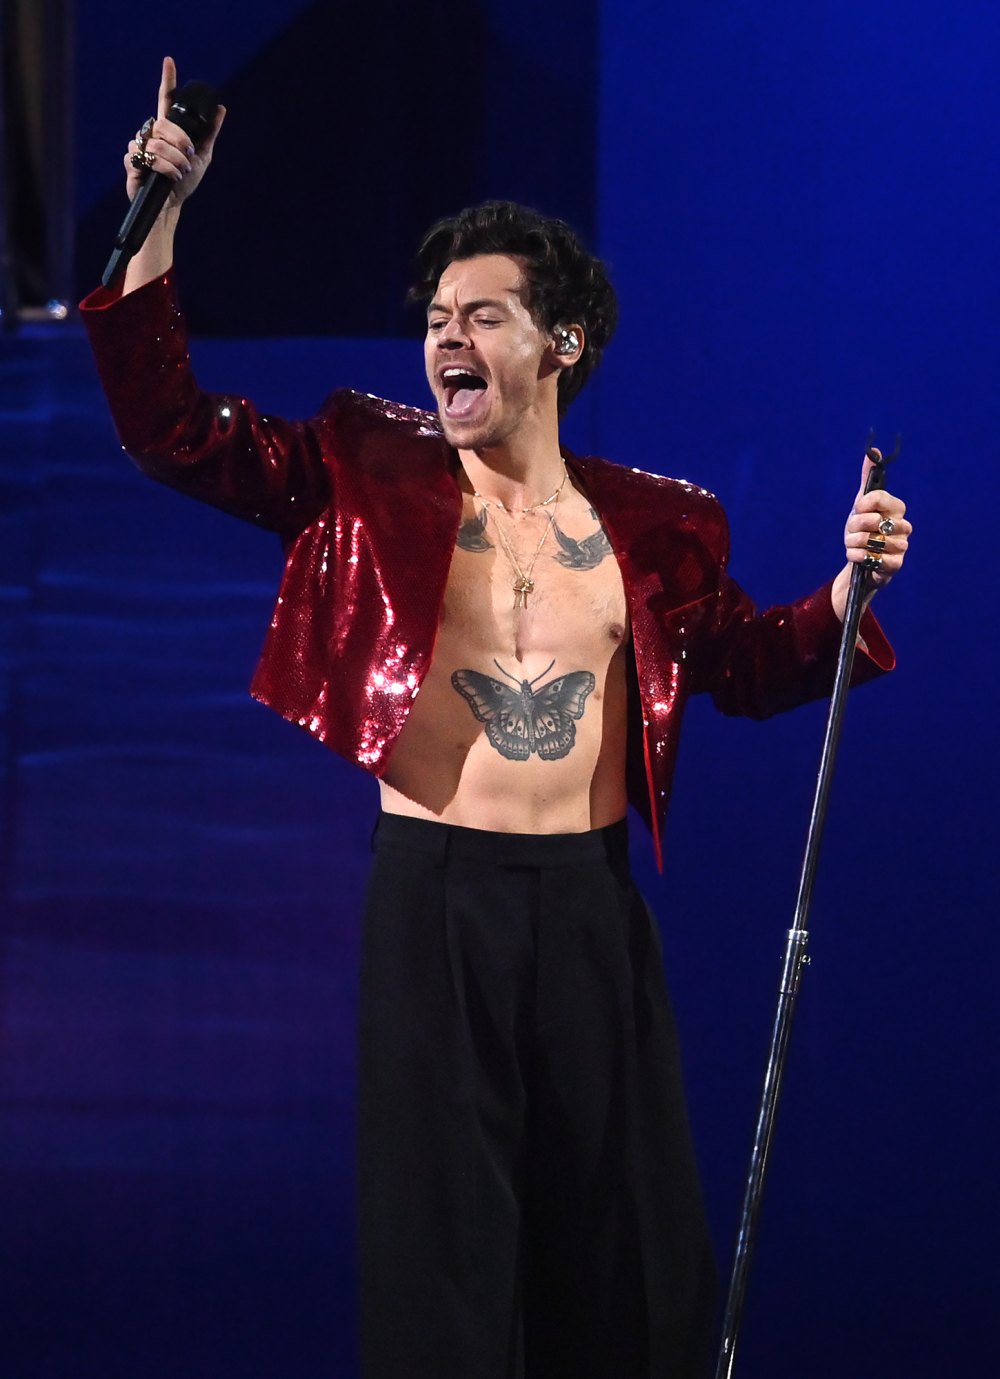 https://www.usmagazine.com/wp-content/uploads/2023/02/Harry-Styles-Sweeps-at-2023-Brit-Awards-Thanks-Former-One-Direction-Bandmates-During-Speech-02.jpg?w=1000&quality=86&strip=all